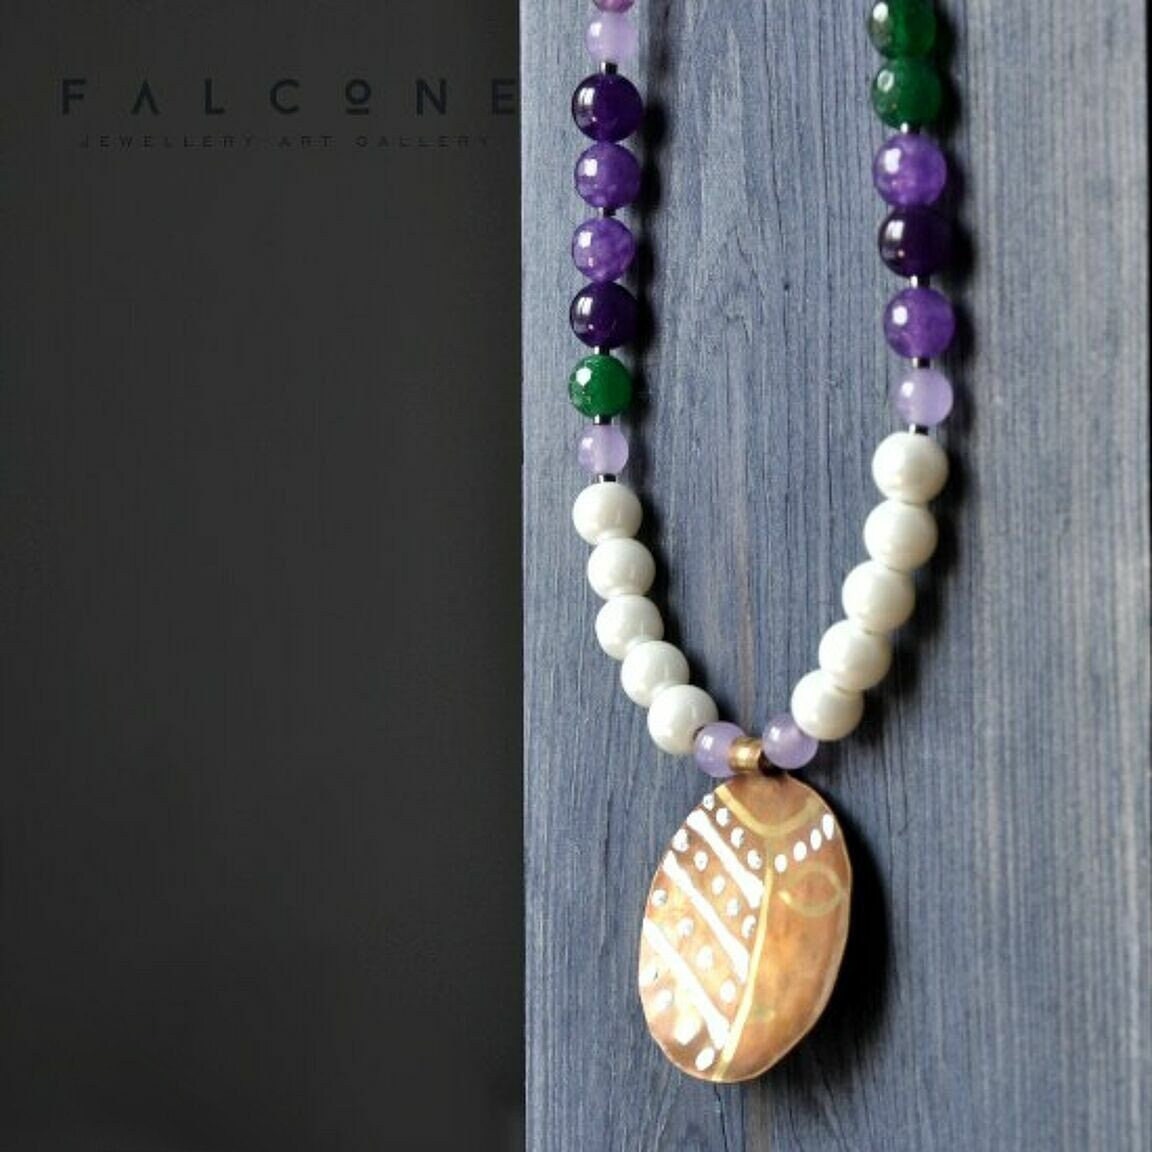 Necklace with engraved and enameled brass pendant, glass pearls and natural stones 'Africana in Purple'